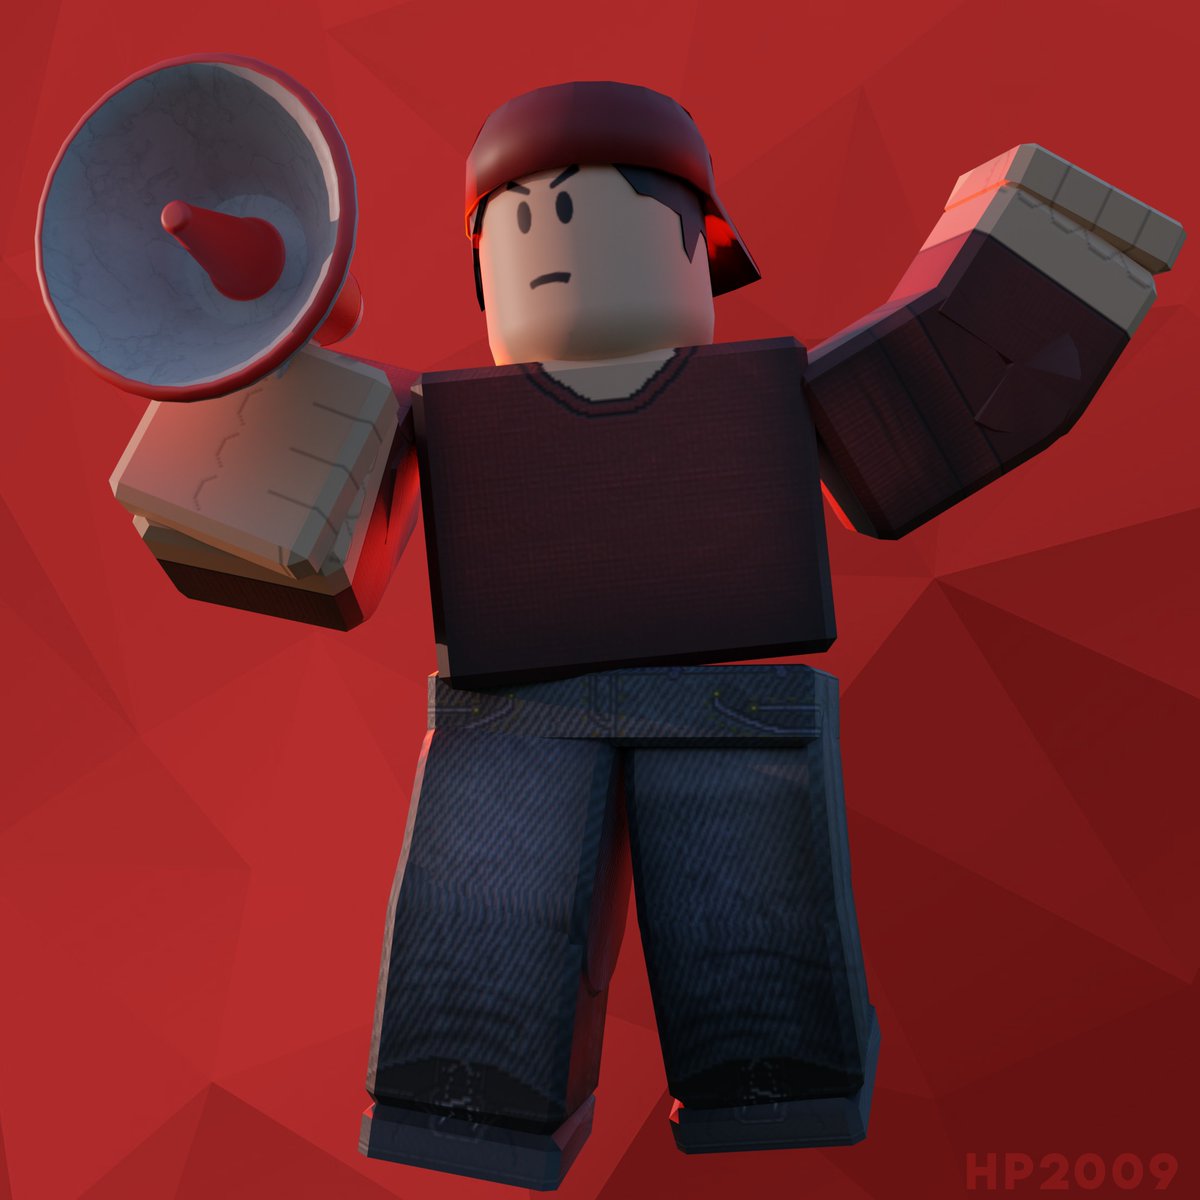 Hp2009 Gfx On Twitter Made Some Arsenal Renders Rolvestuff Roblox Robloxdev Robloxgfx Robloxart - panzer lehr roblox at panzerlehrrblx twitter